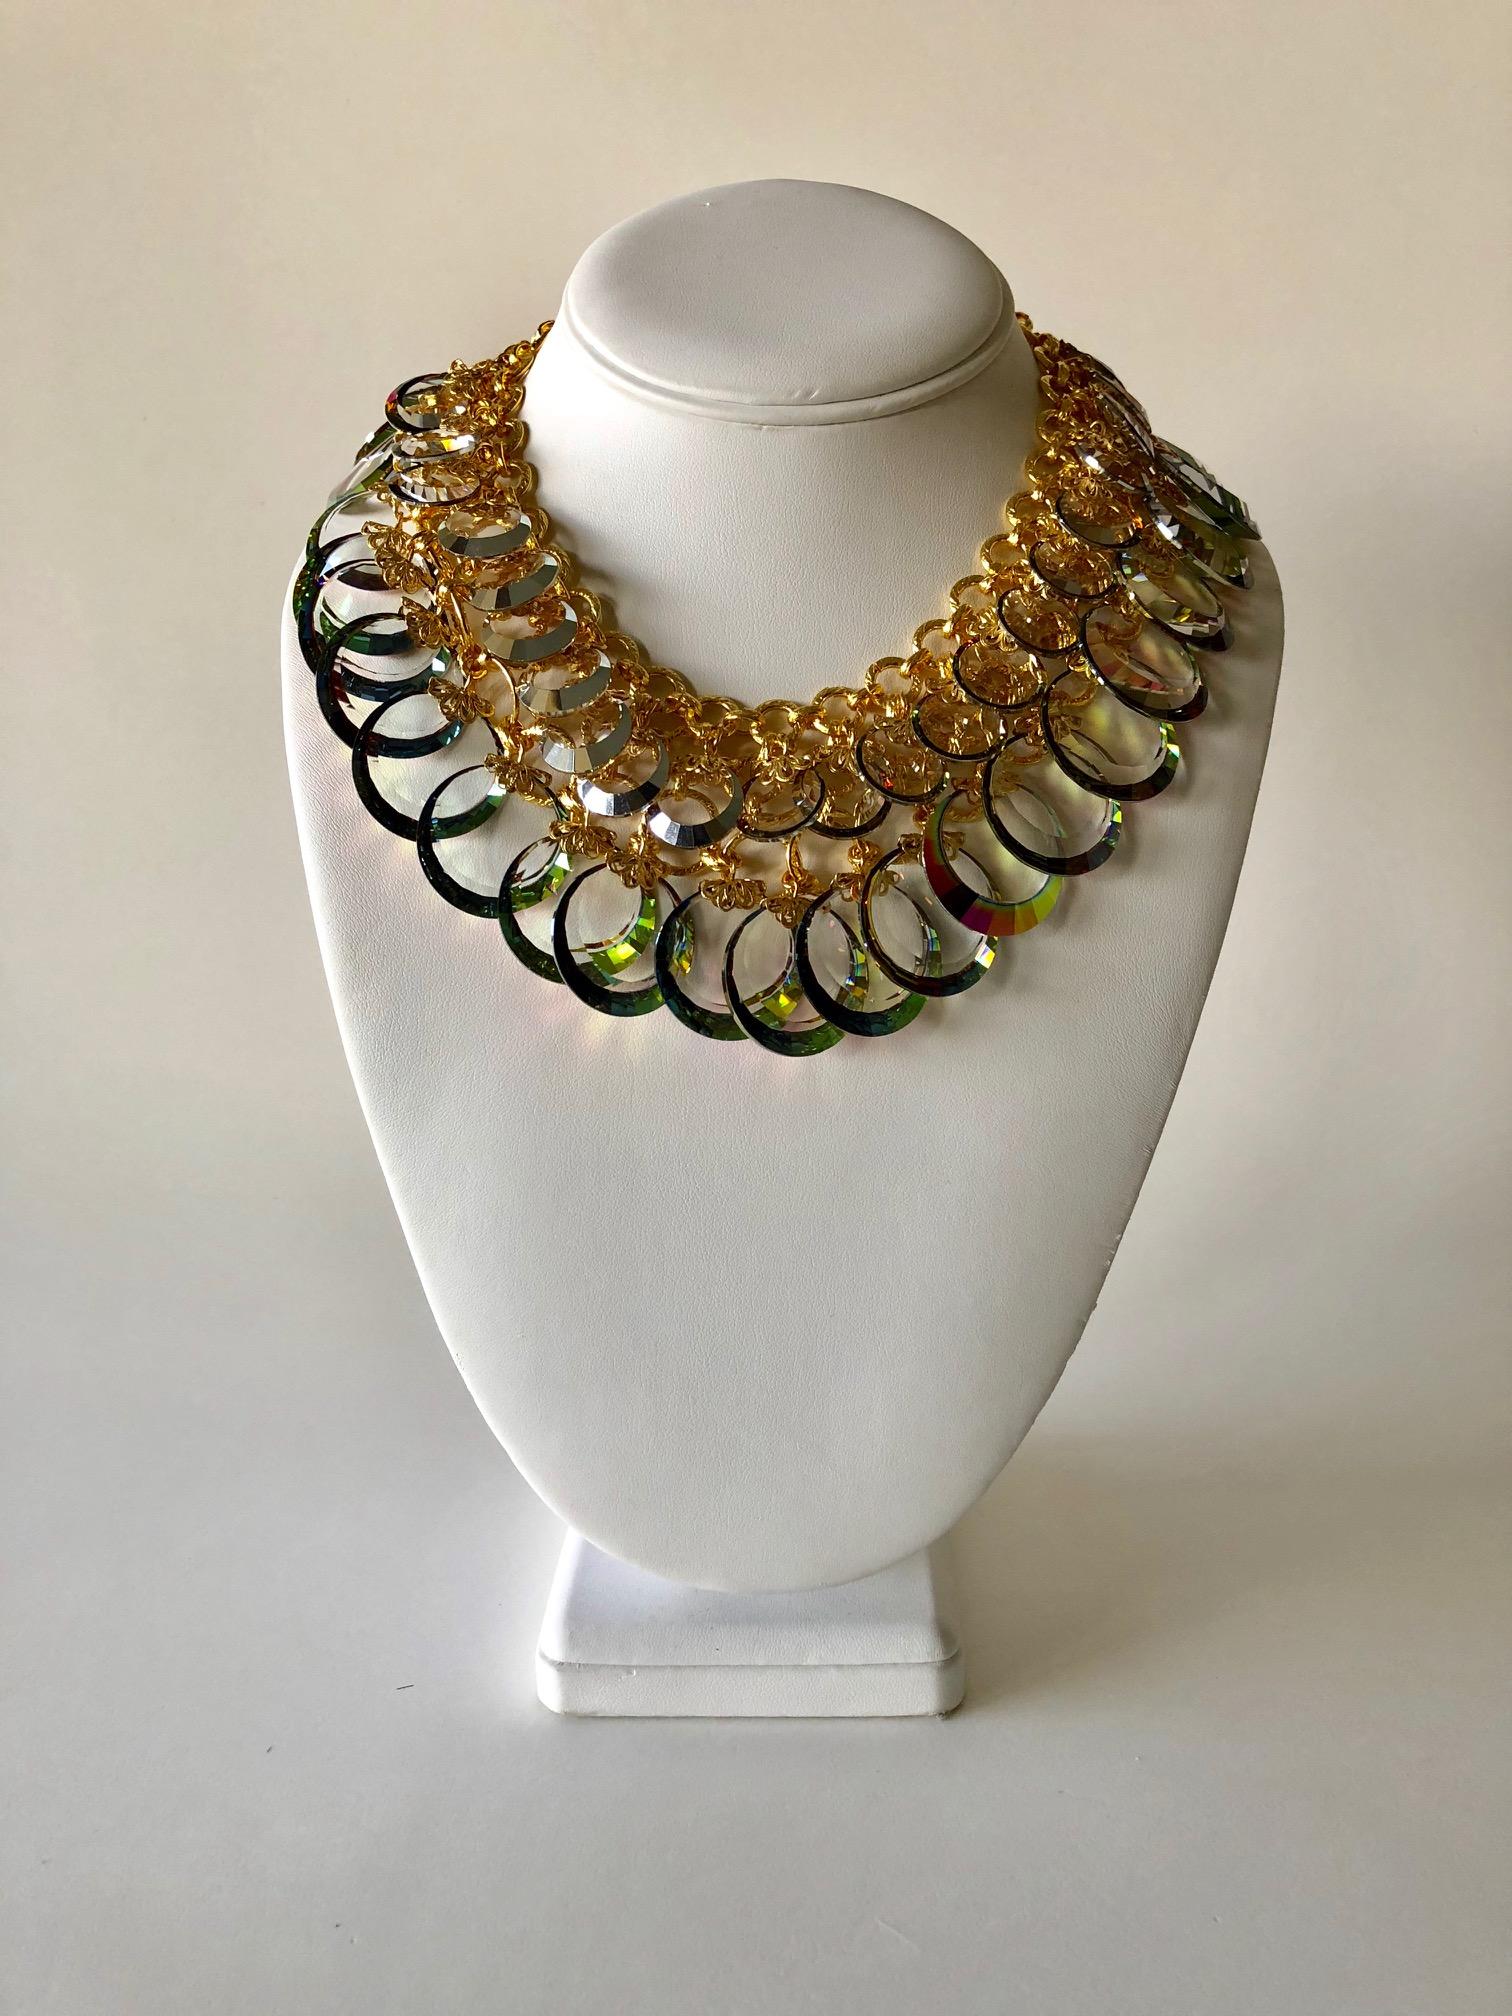 Women's Vintage French Haute Couture Gold Crystal Statement Bib Necklace 